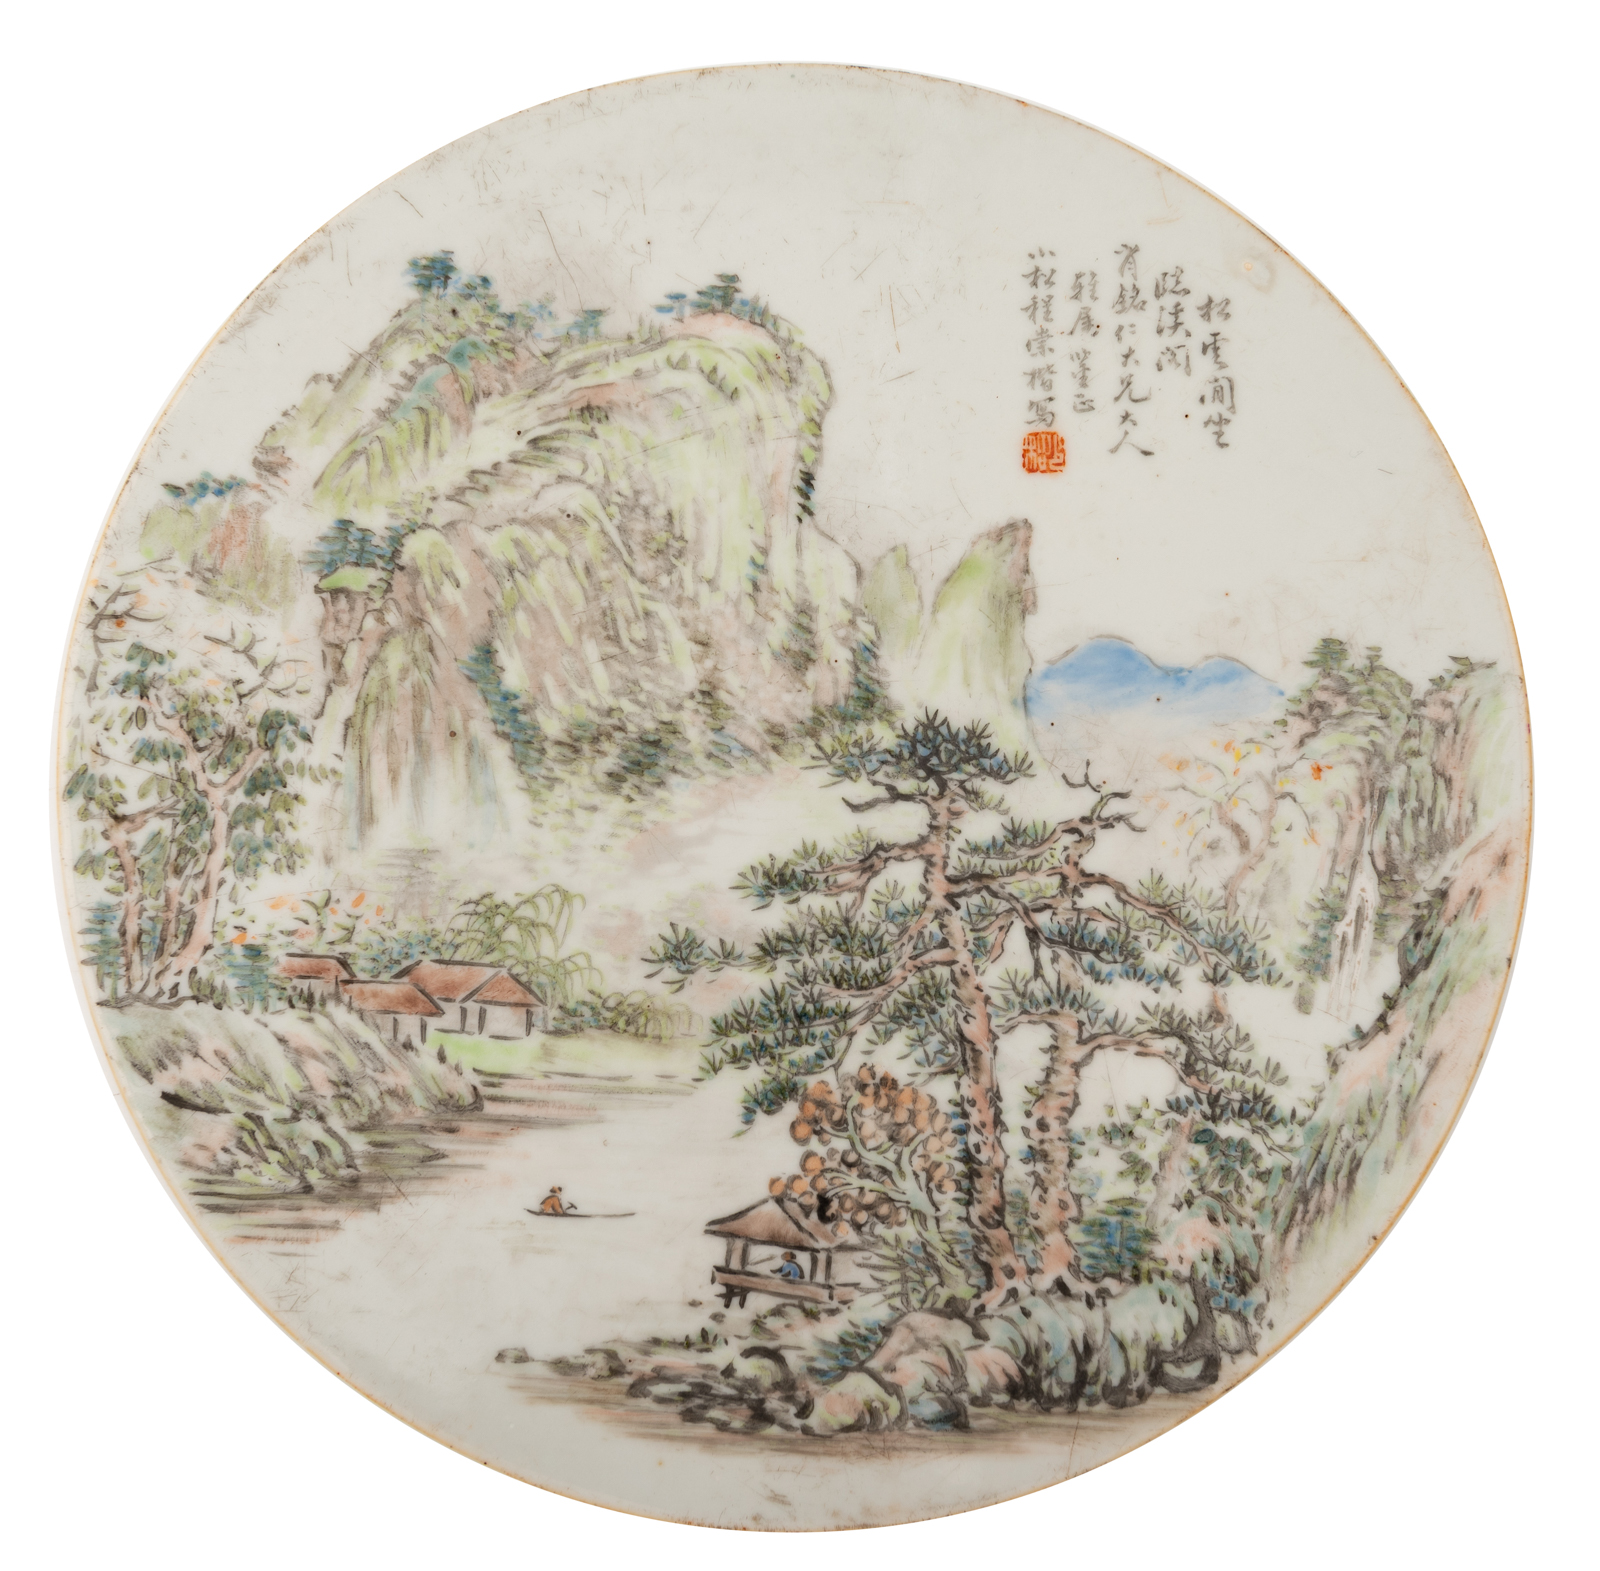 A Chinese polychrome porcelain round plaque, decorated with figures in a mountainous river landscape